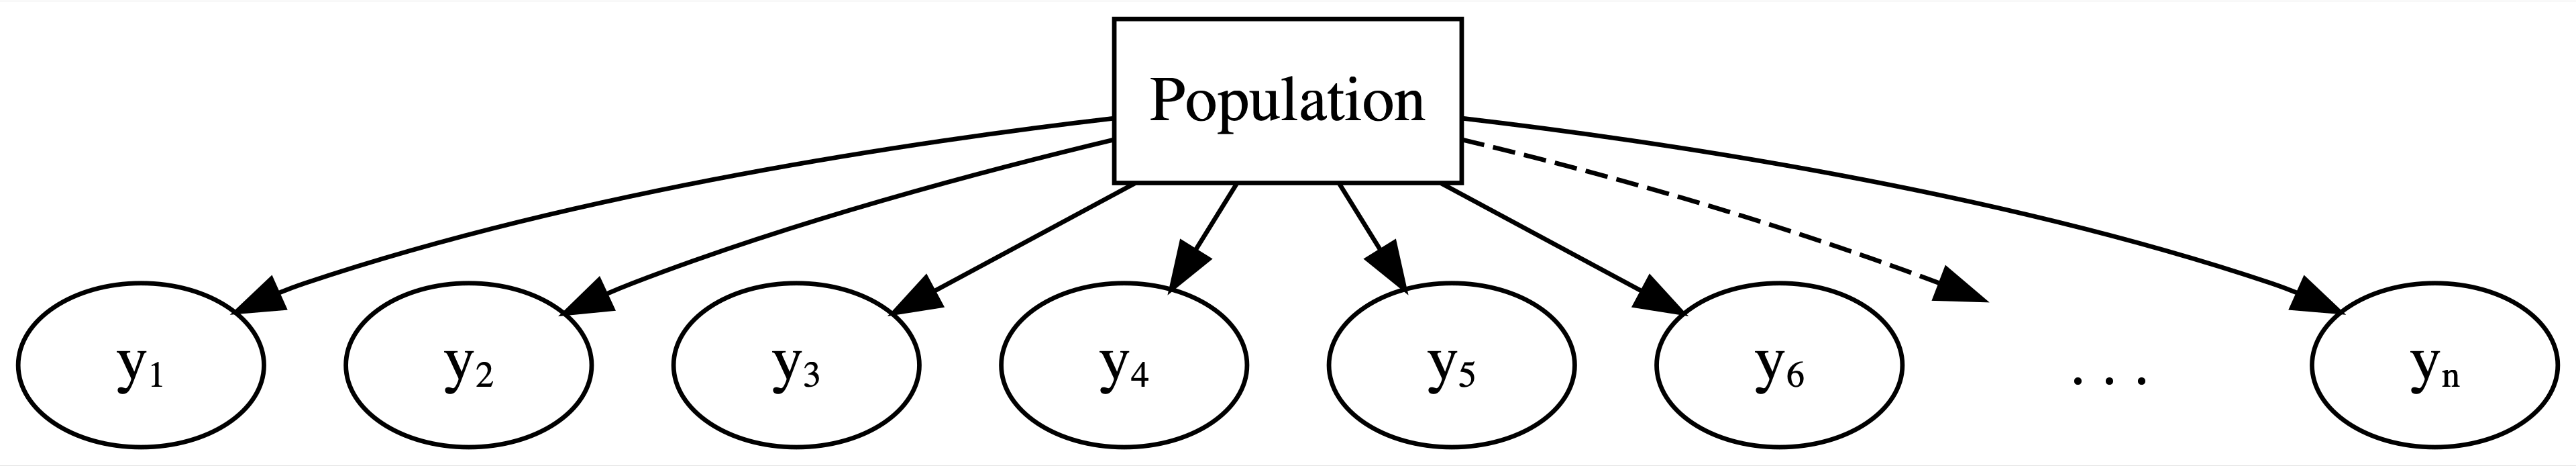 A flow chart. At the top is a box labeled Population. Out of this box are 7 different arrows leading to bubbles at a lower level, labeled y1, y2, up to yn, each representing a unique data point.